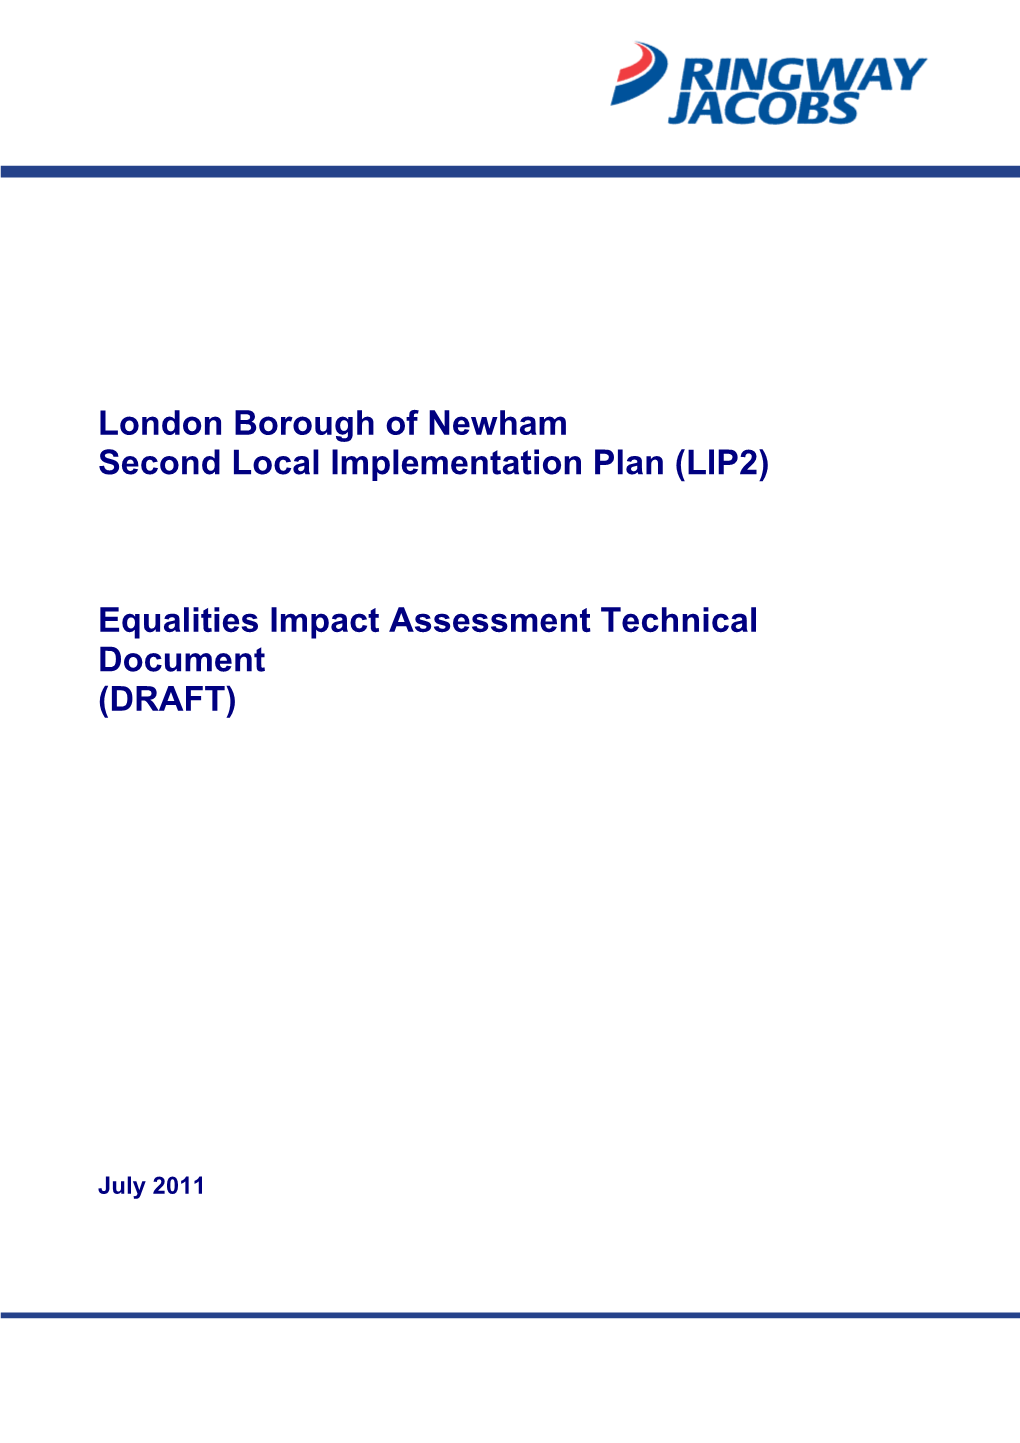 Second Local Implementation Plan for London Borough of Newham Eqia